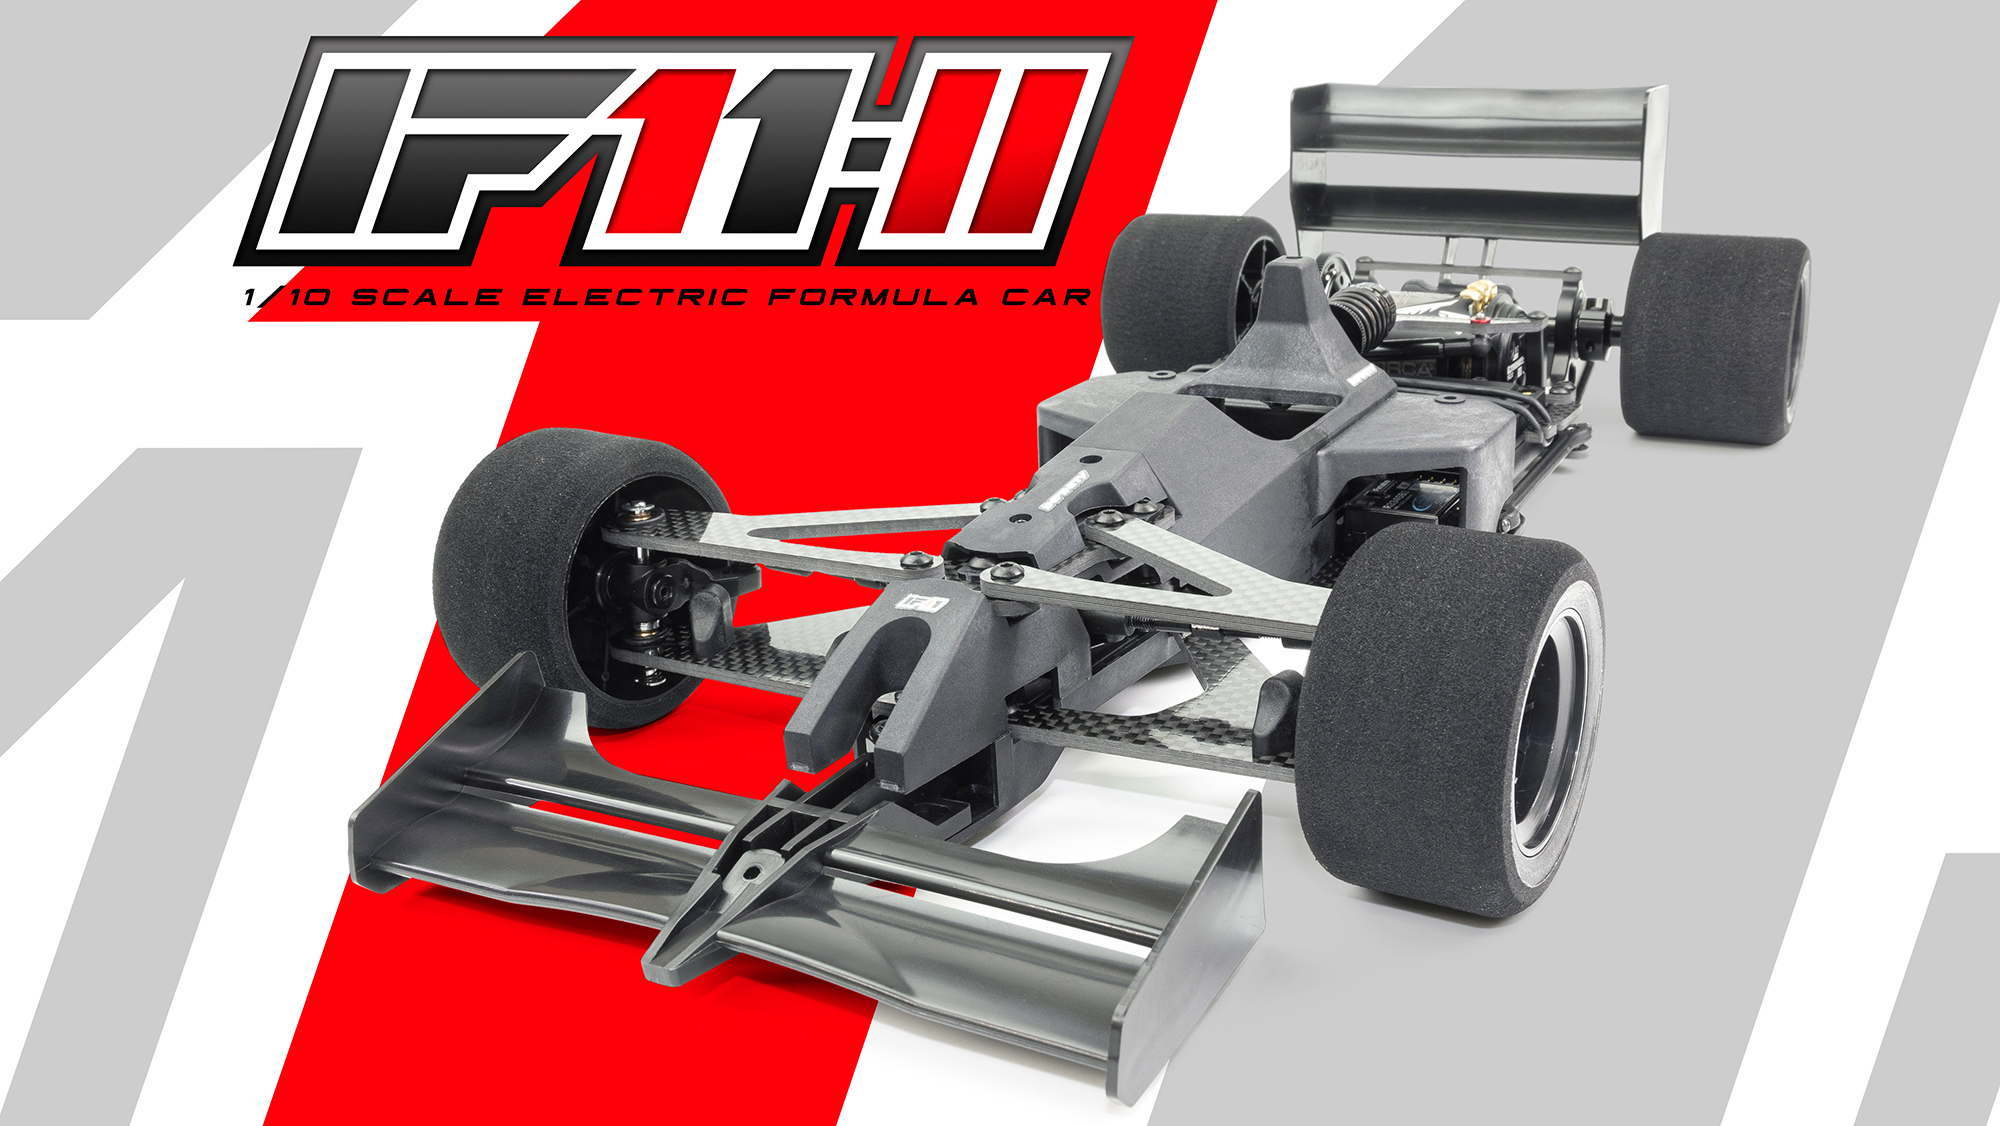 INFINITY - IF14-II FWD RS 1/10 SCALE EP FWD TOURING CAR CHASSIS KIT